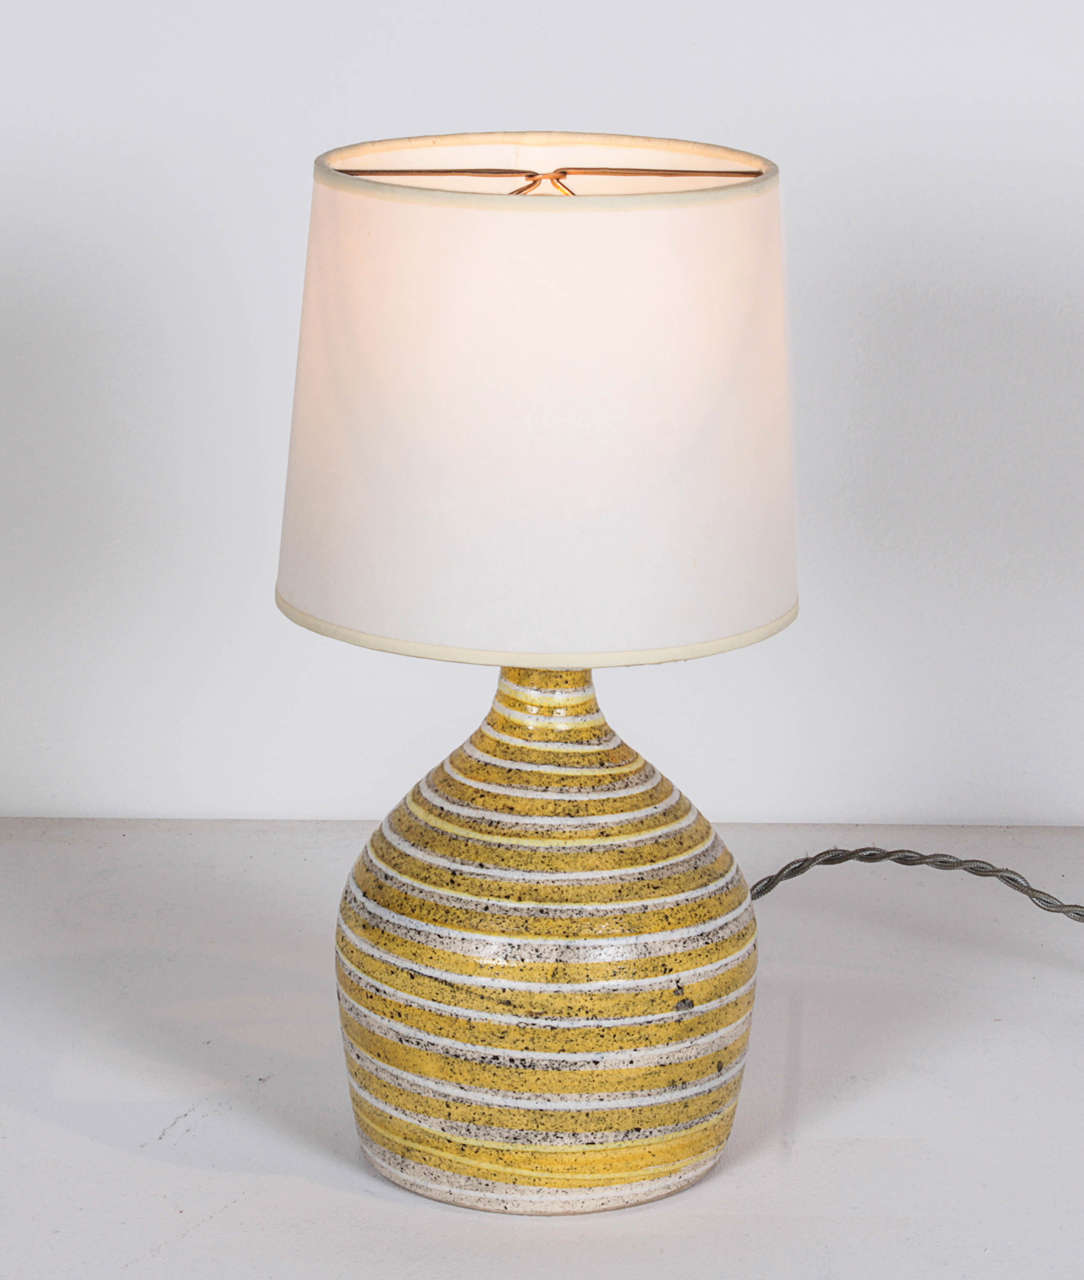 French ceramic lamp, circa 1960.
Shades of yellow, gray and white glaze.

Signed: With Logo and 1665.